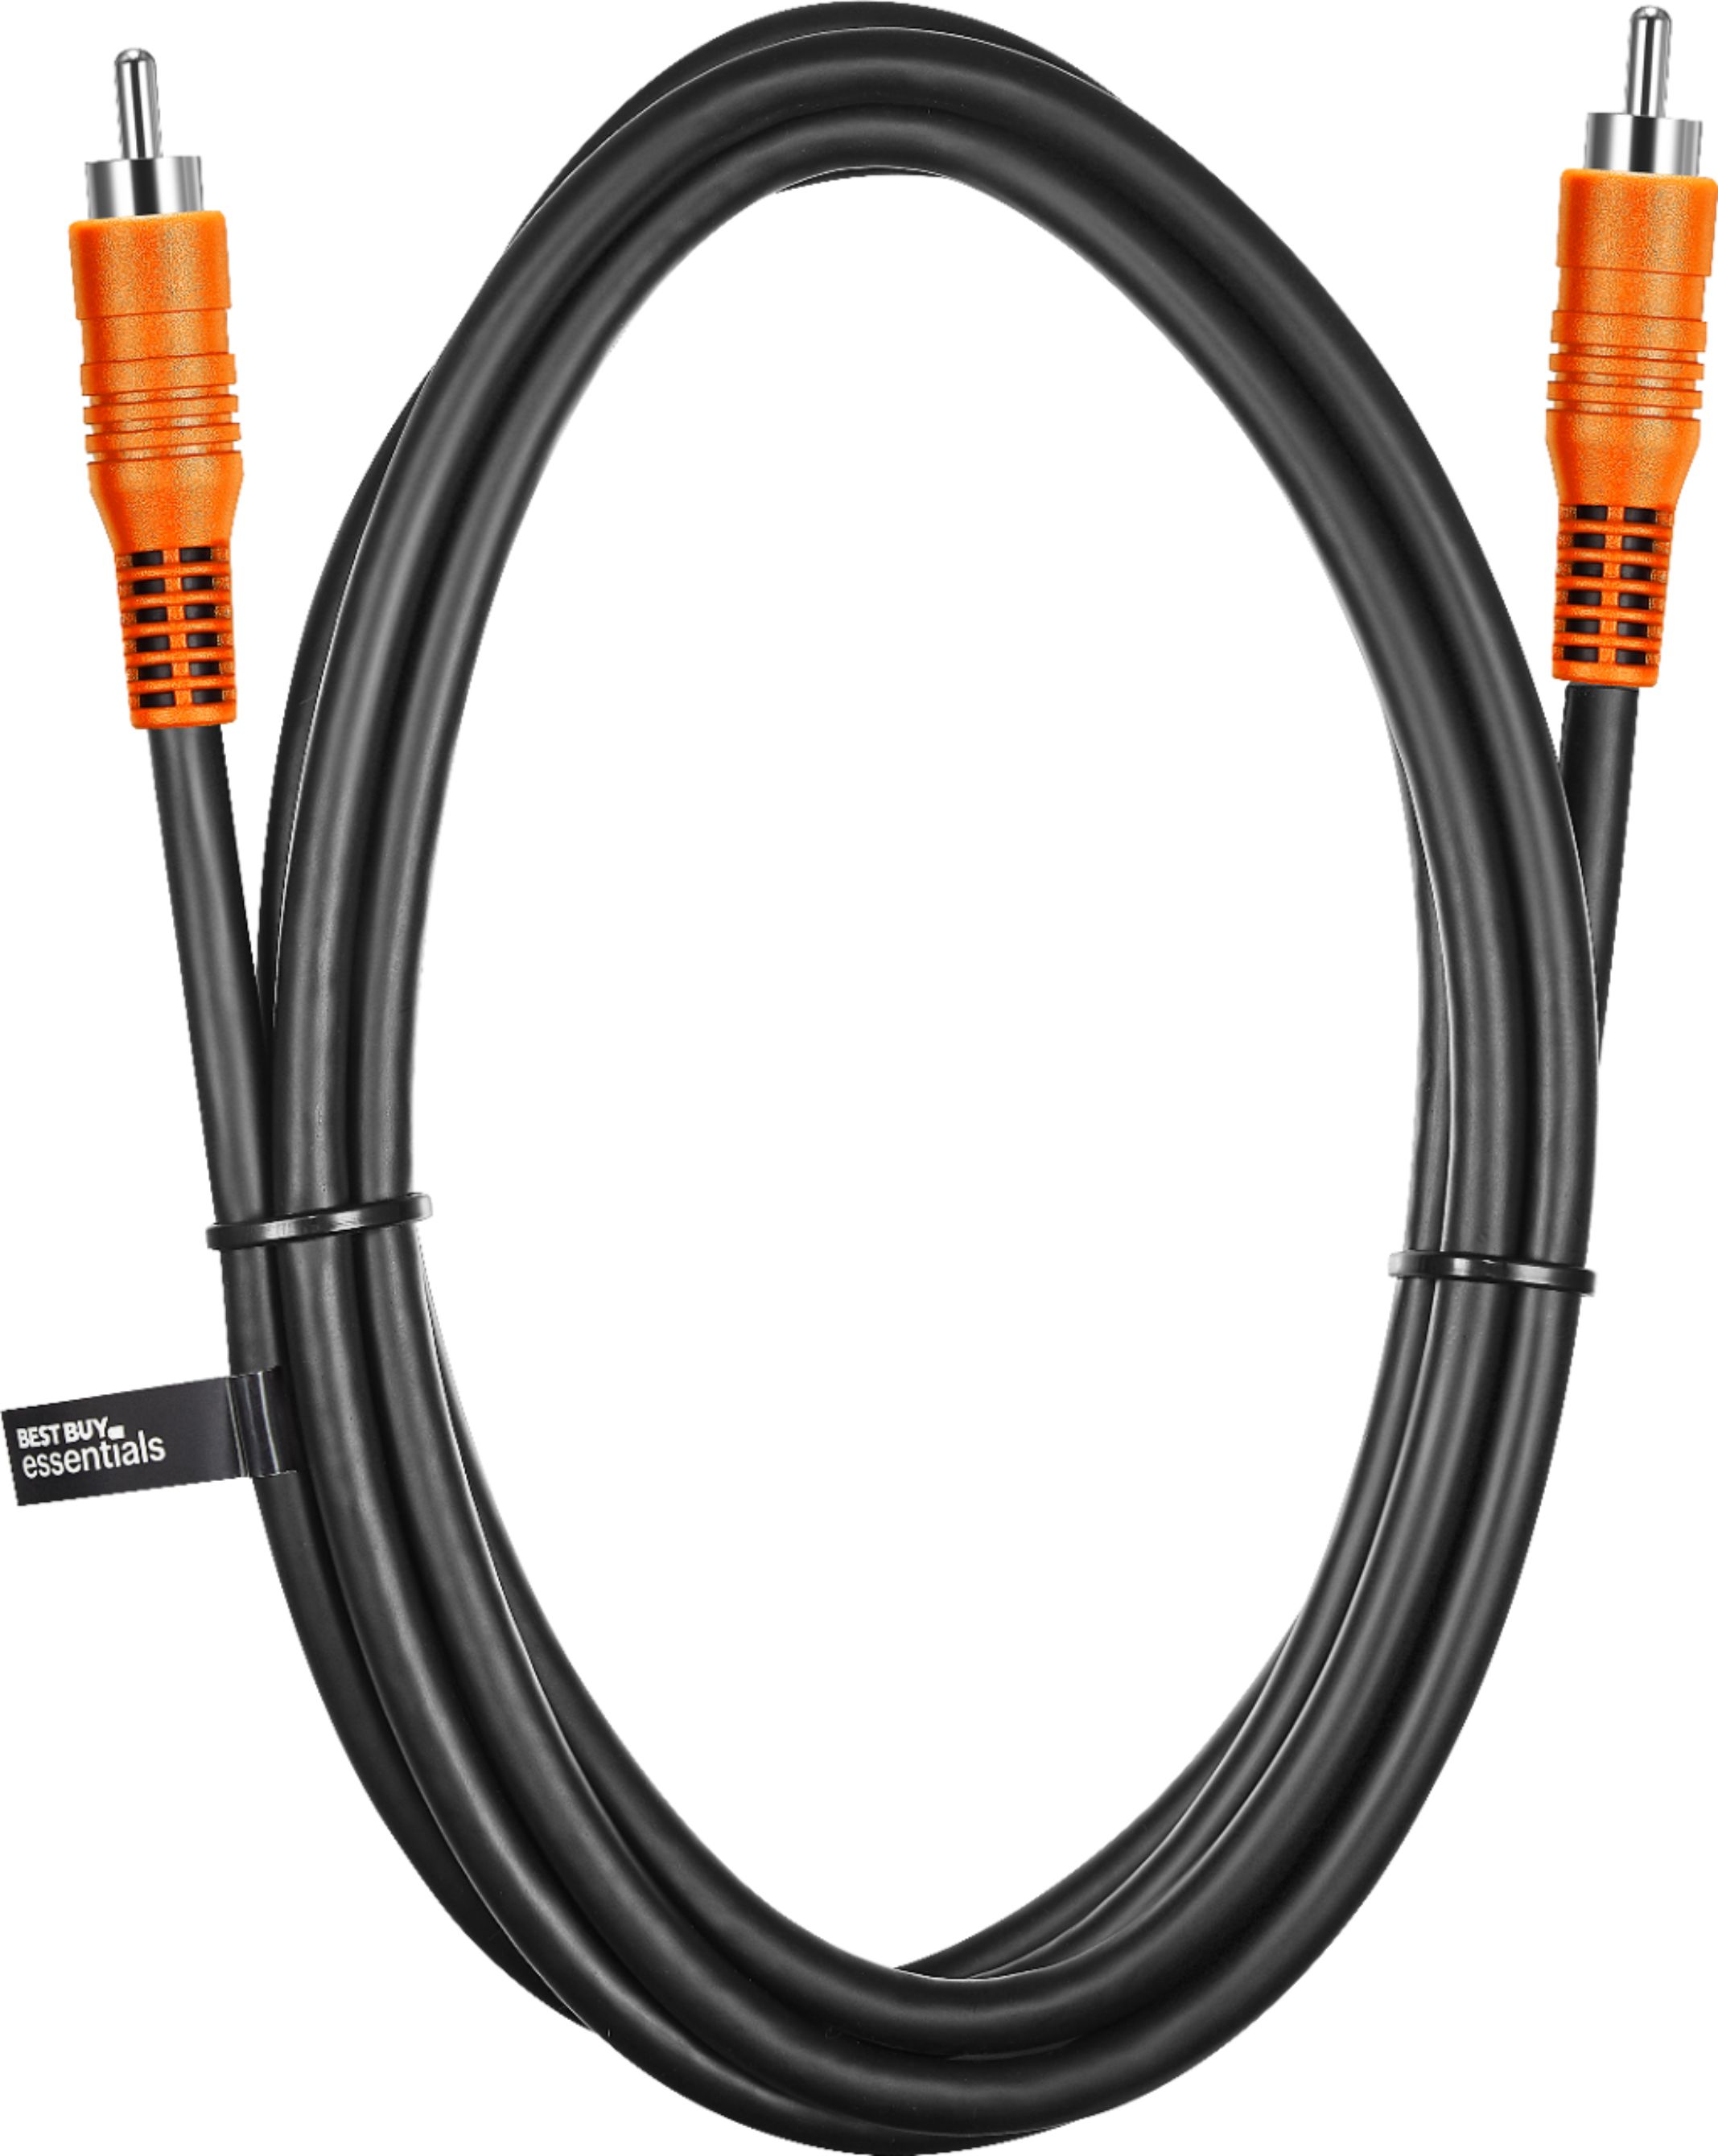 Insignia™ 6' Digital Audio Cable (Coaxial) Black NS-HZ519 - Best Buy